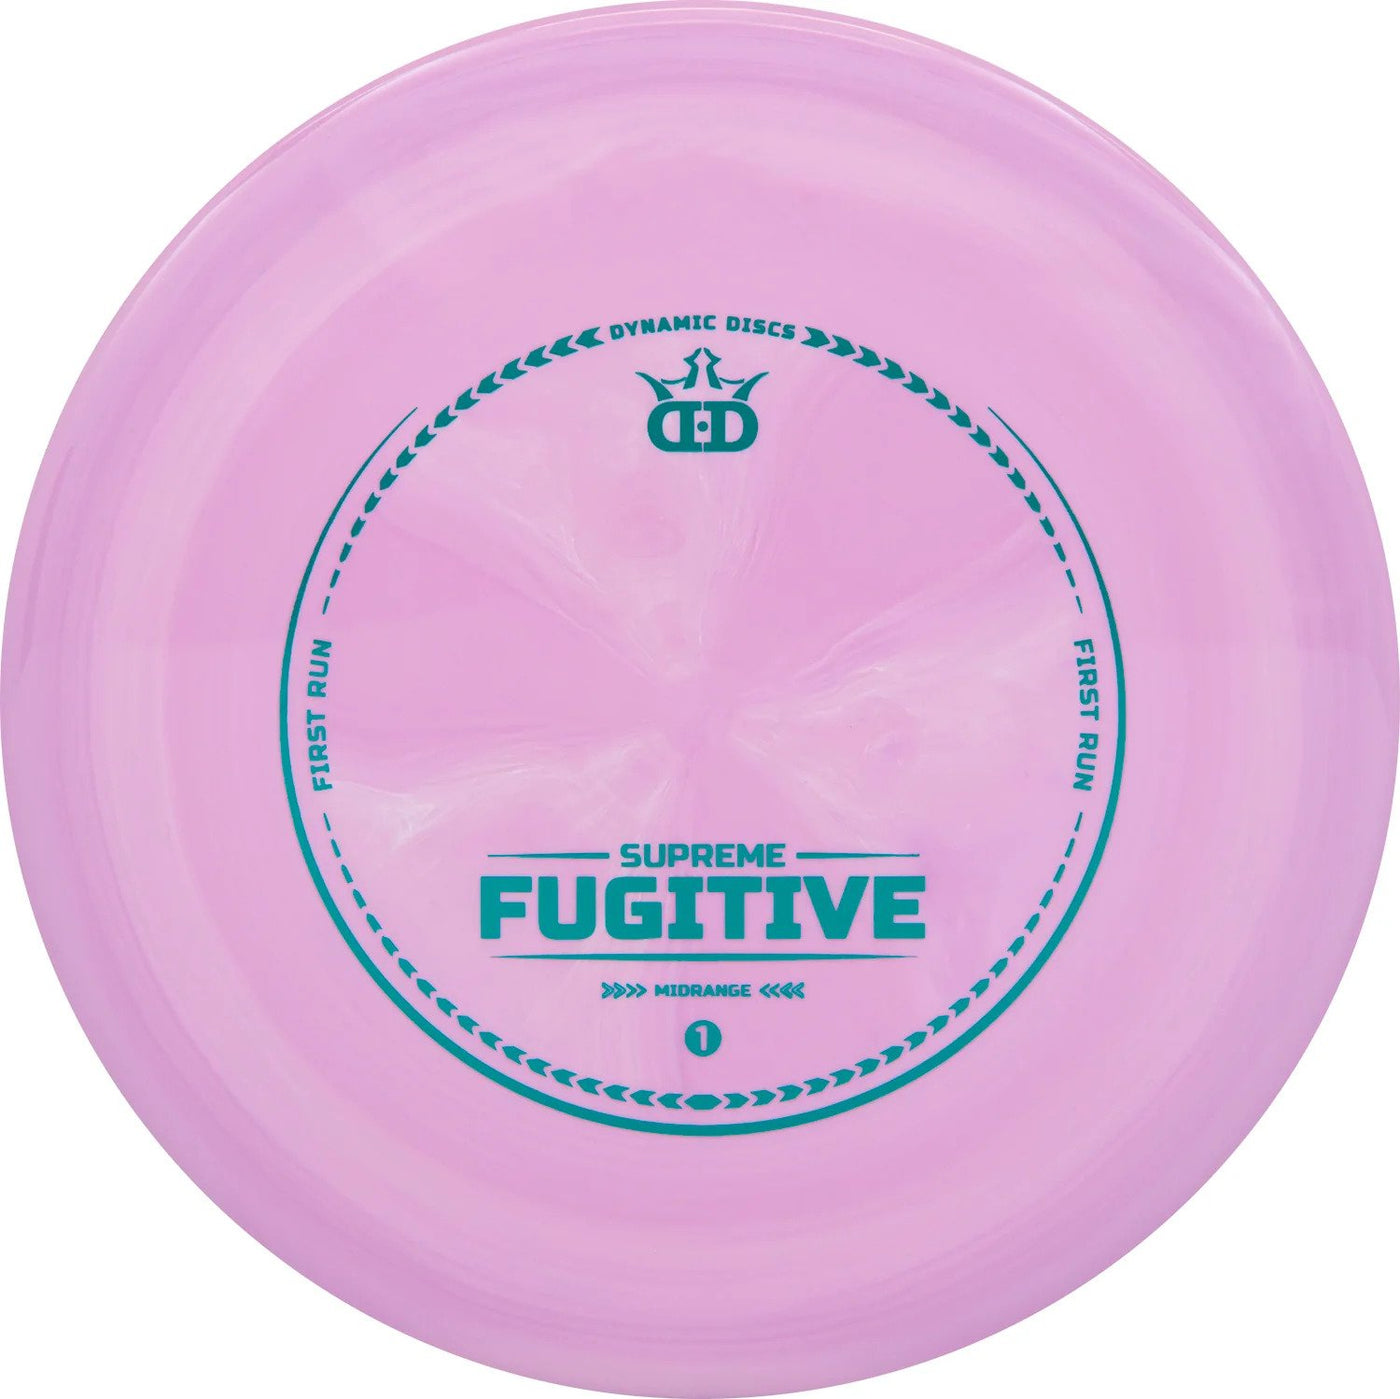 Dynamic Discs Supreme Fugitive Midrange with First Run Stamp - Speed 5